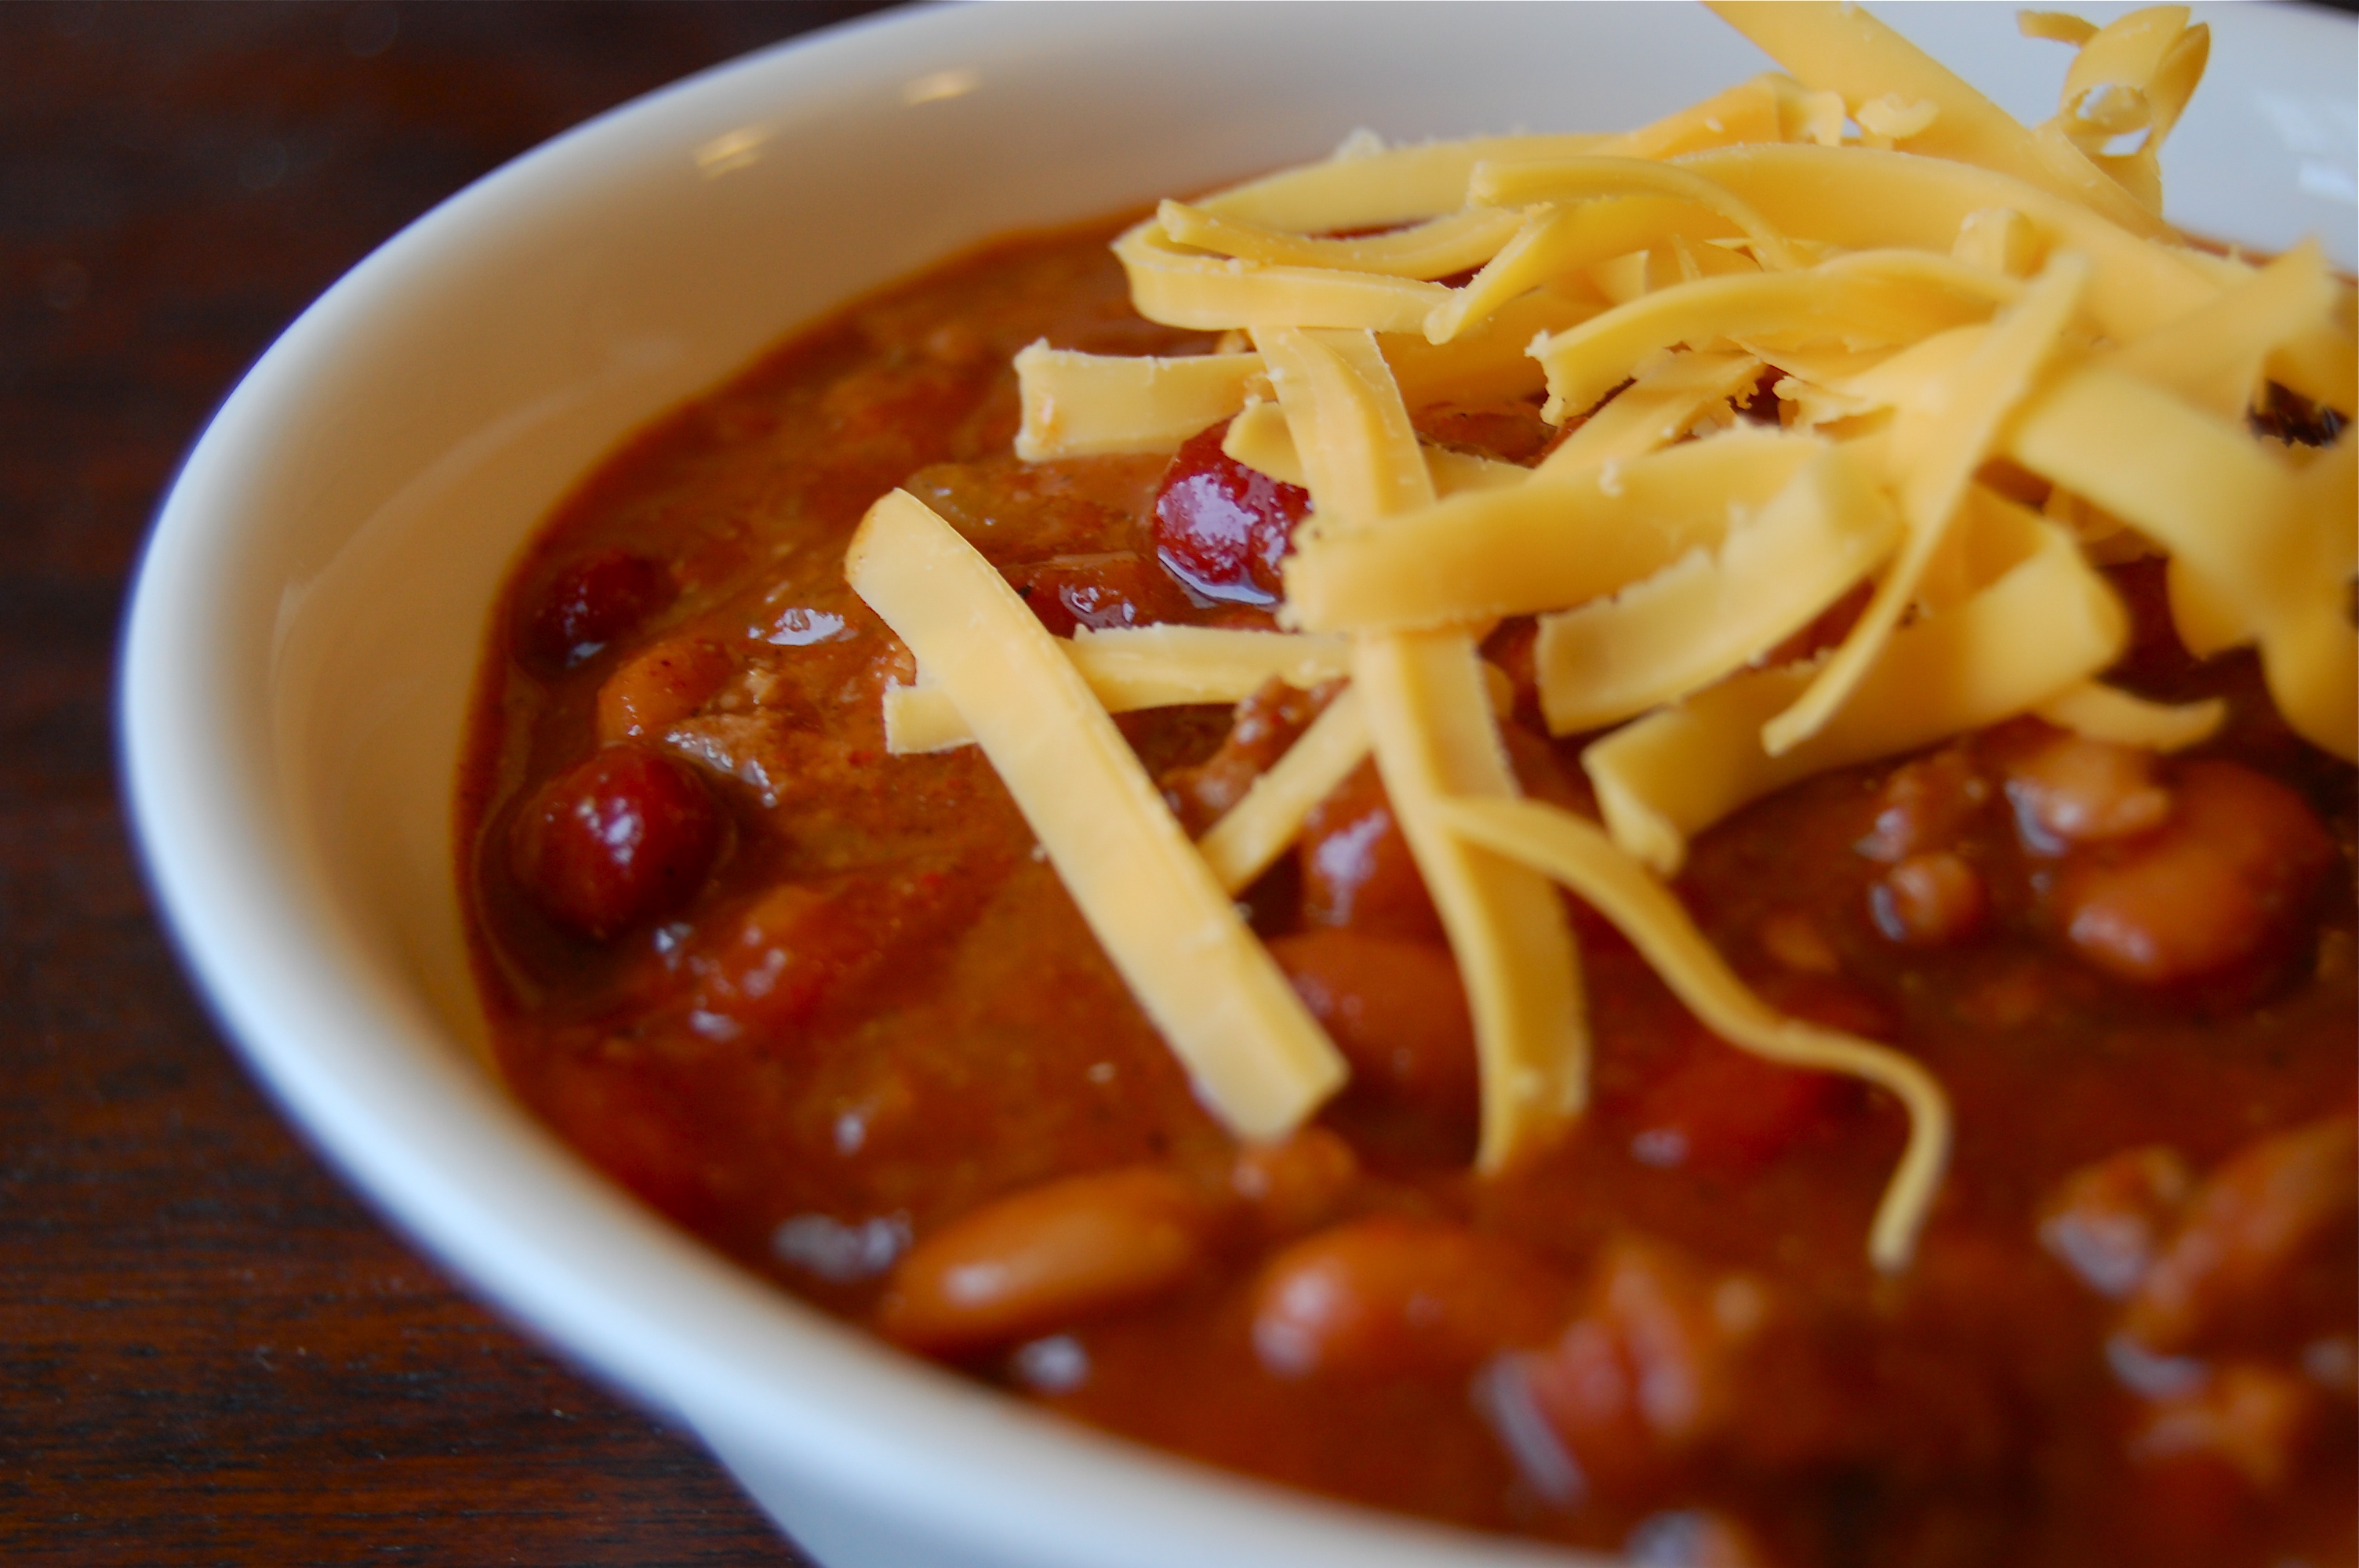 Top Secret Recipes Version Of Wendy’S Chili By Todd Wilbur